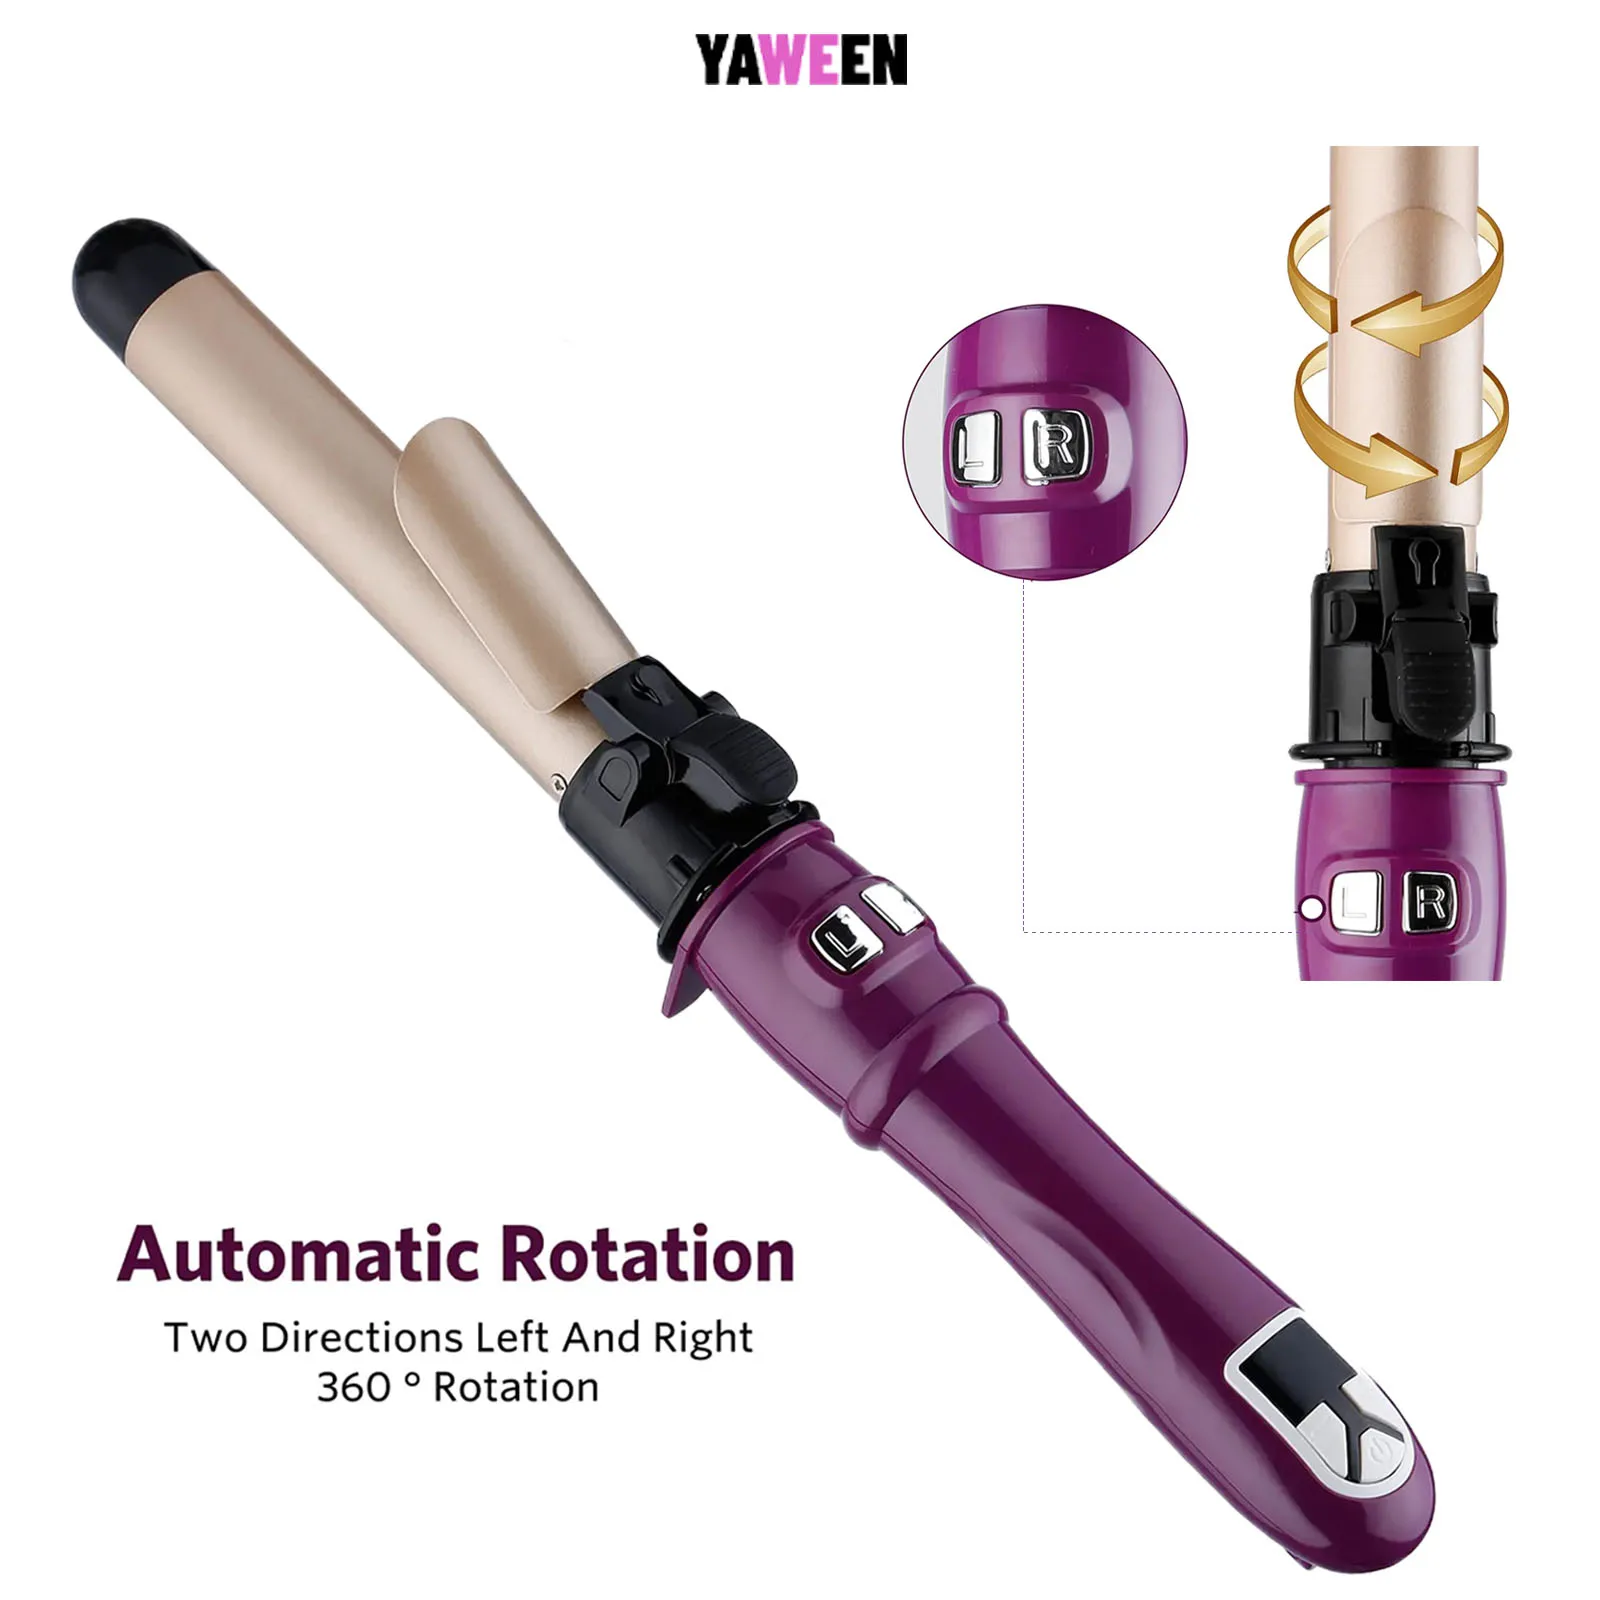 YAWEEN Automatic Rotation Curly Hair Rod With 360 DegreeTemperature Display Screen for 30s Instant Heating Rod for Anti Scalding stylish hairdressing curler user friendly anti scalding automatic curling iron stick hair iron curler hair curler